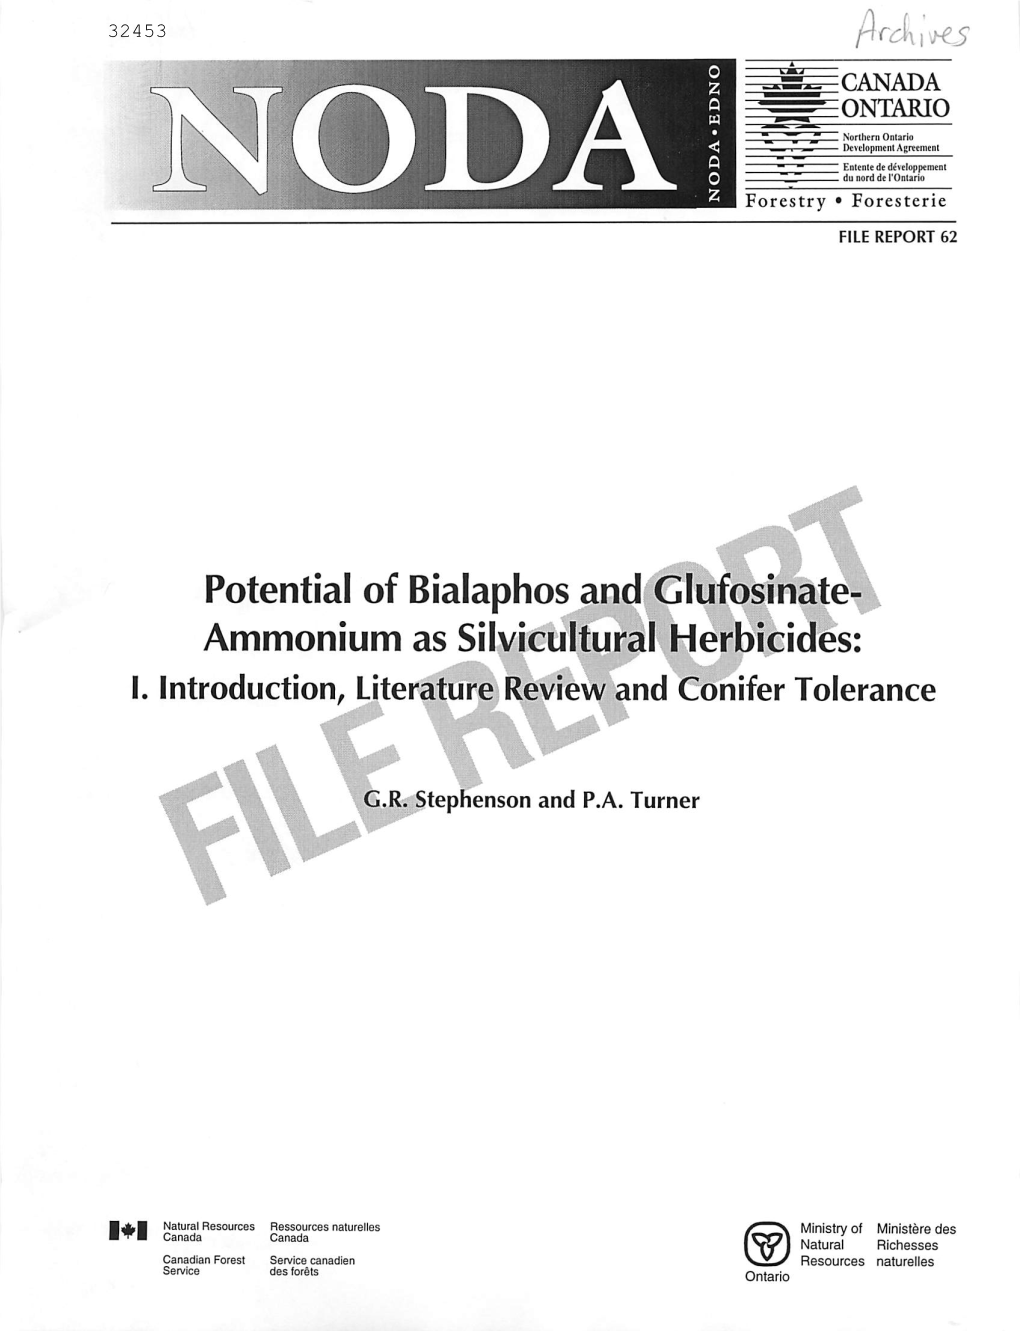 Potential of Bialaphos and Glufosinate- Ammonium As Silvicultural Herbicides: I